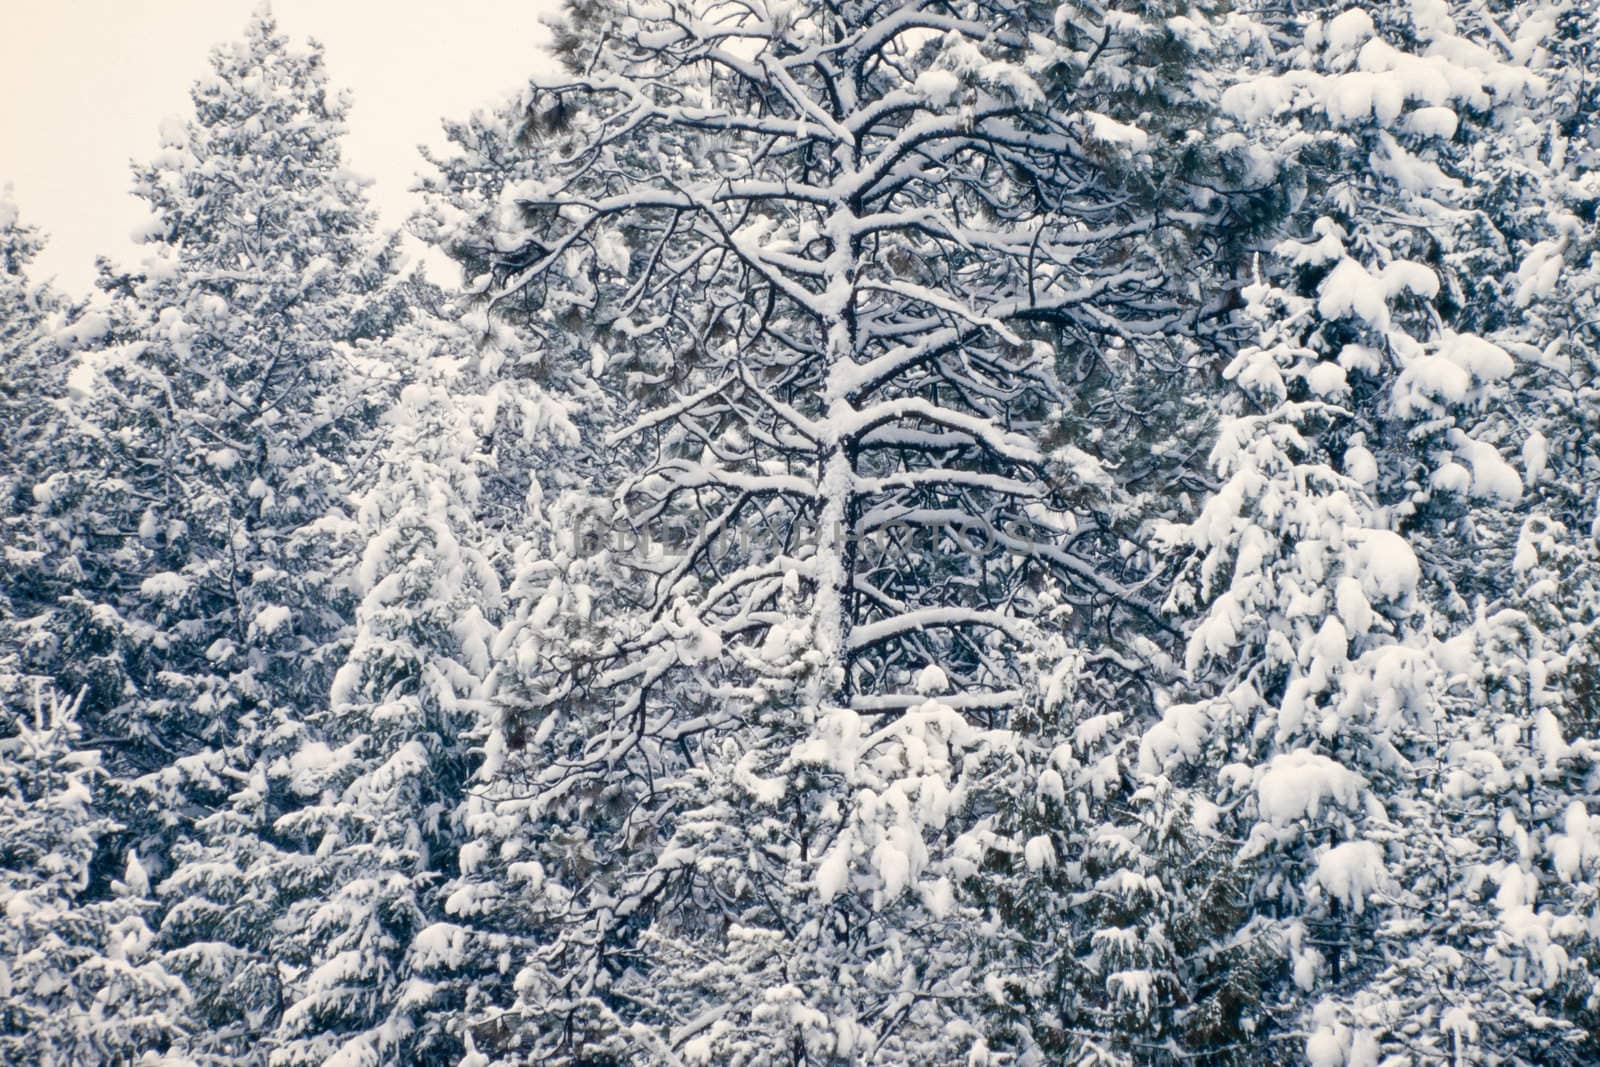 Background texture pattern of heavily snow-laden mixed coniferous trees.